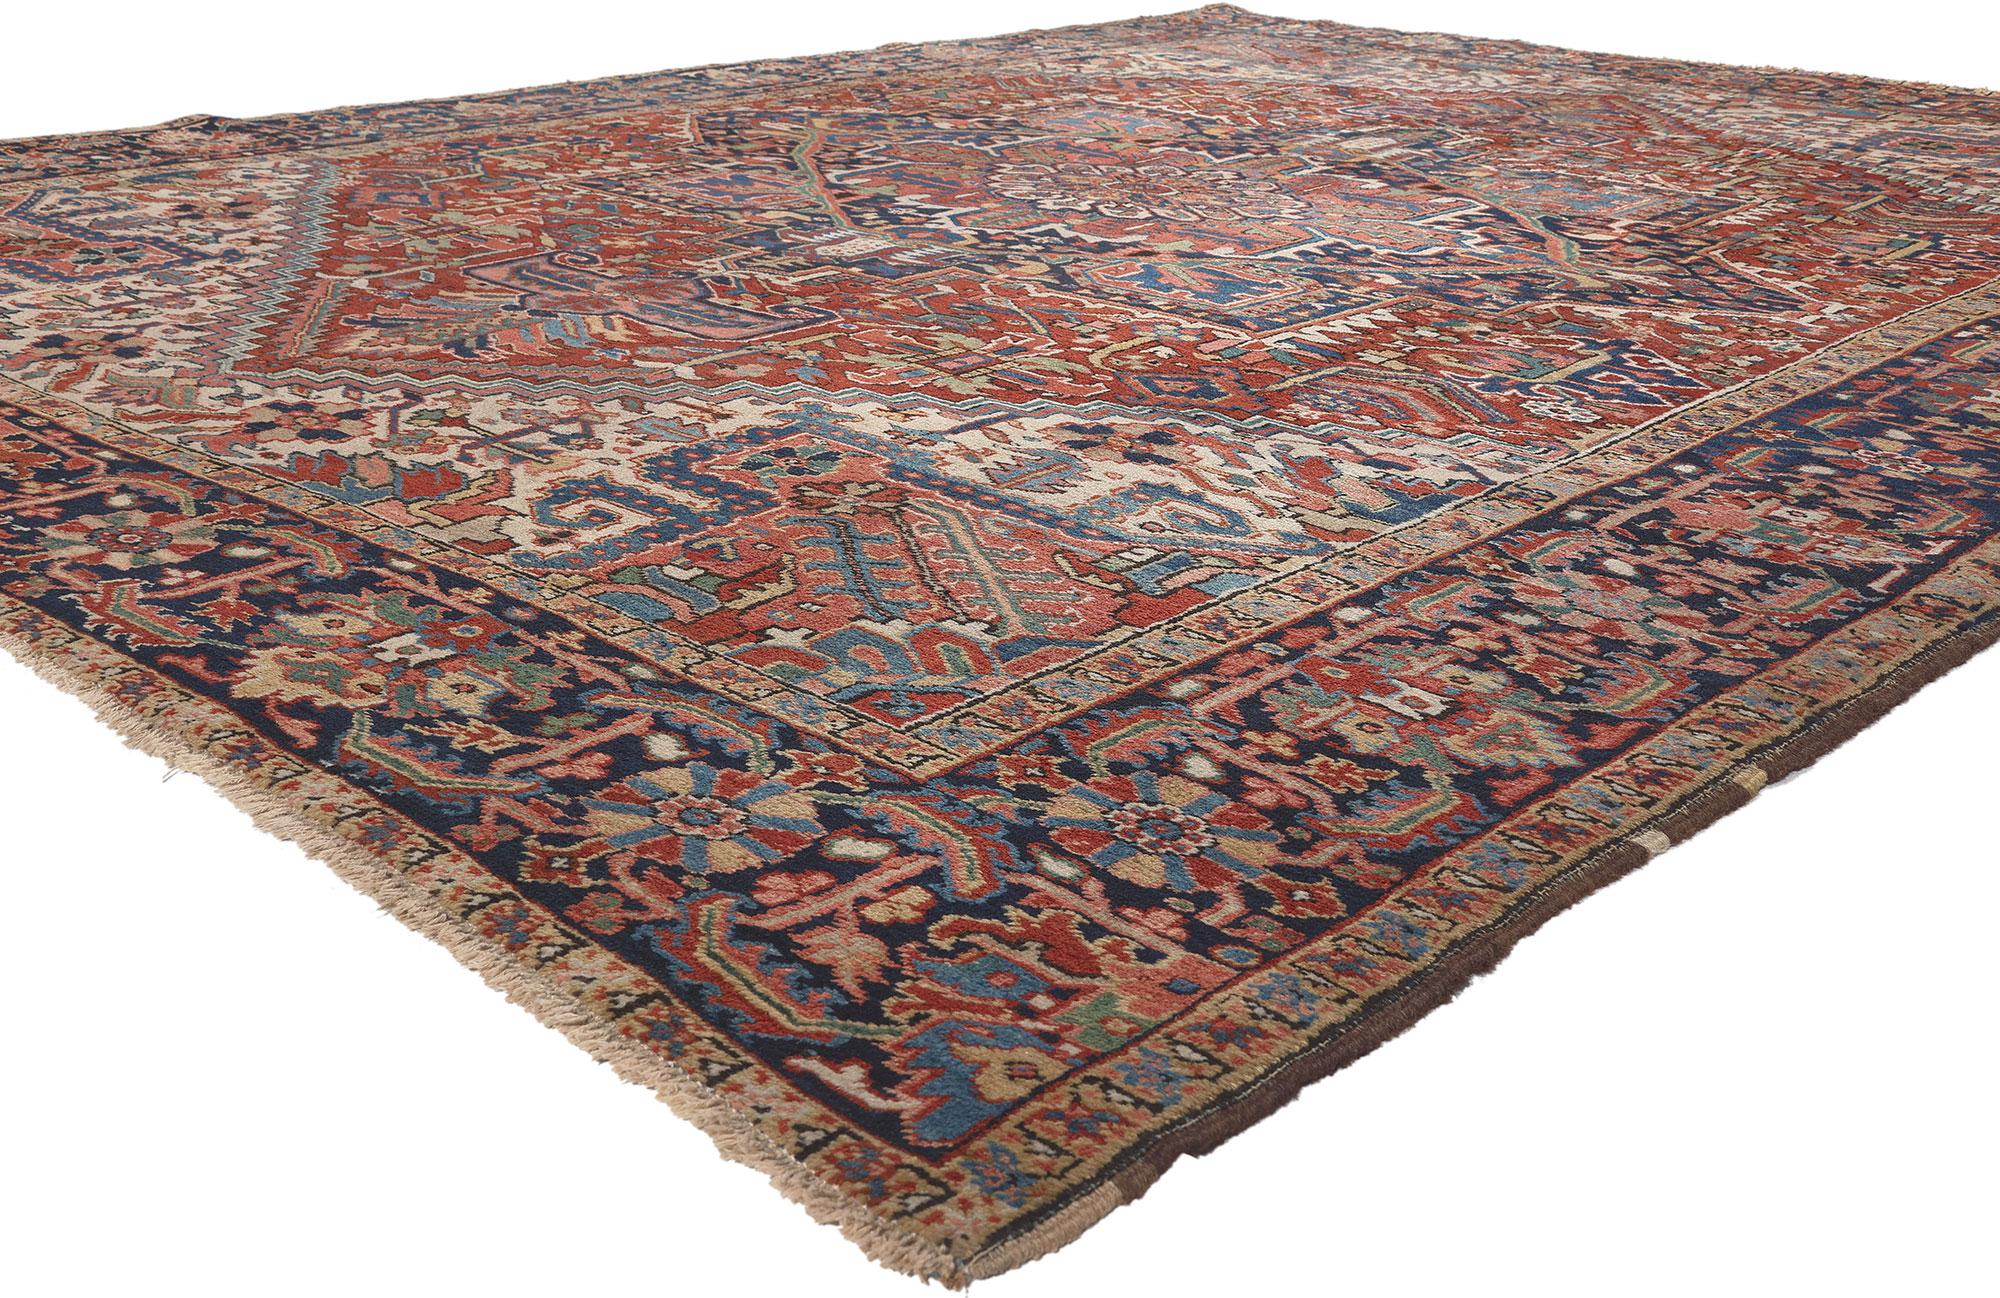 76648 Vintage Persian Heriz Rug, 09'07 x 12'04. 
Perpetually posh meets timeless appeal in this hand knotted wool vintage Persian Heriz rug. The stylish levels of complexity and traditional color palette woven into this piece work together creating